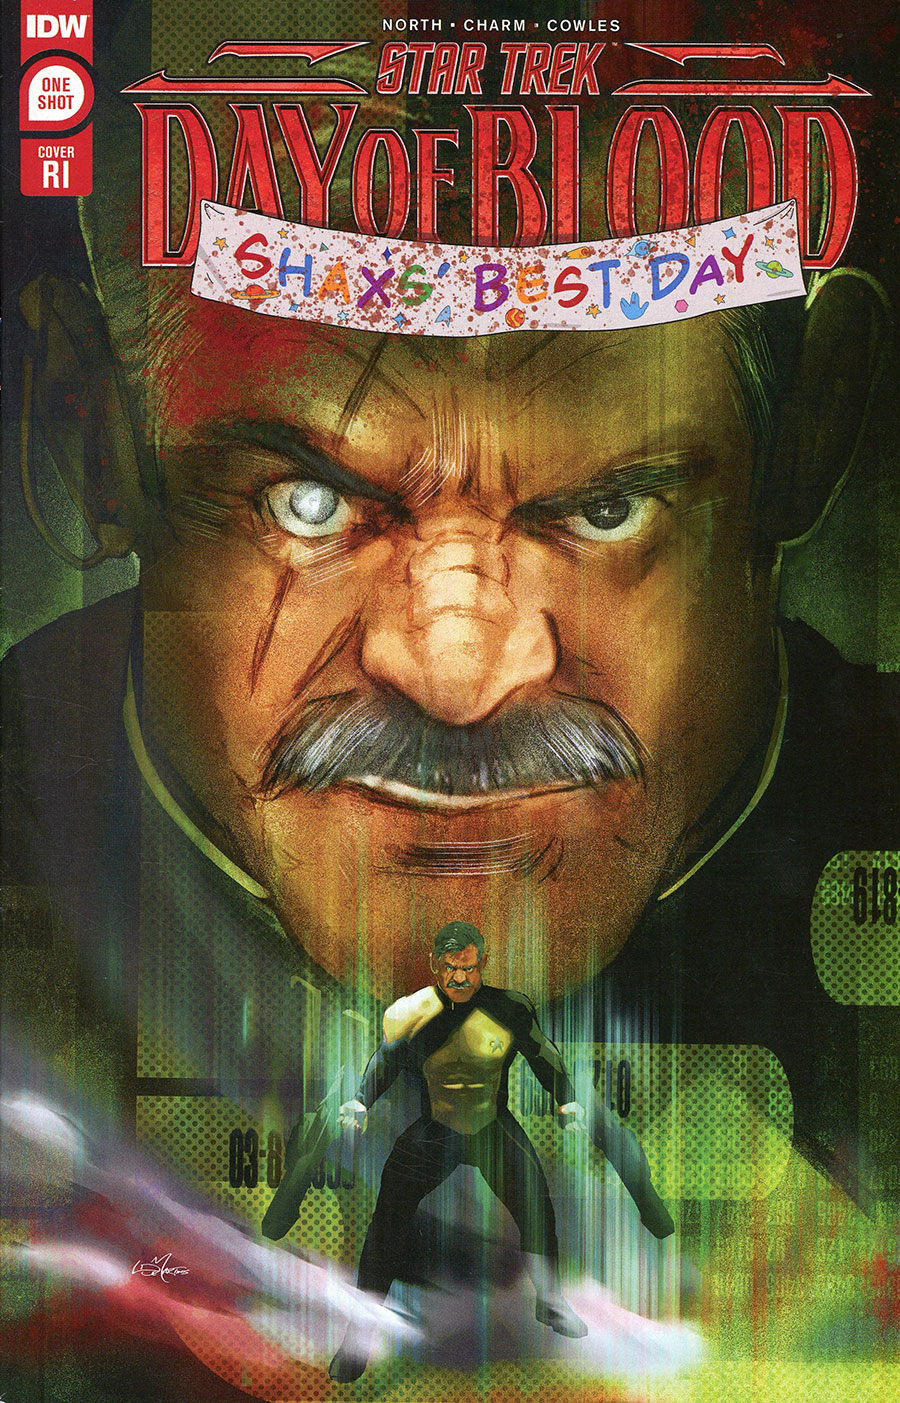 Star Trek Day Of Blood Shaxs Best Day #1 (One Shot) Cover D Incentive Louie De Martinis Variant Cover